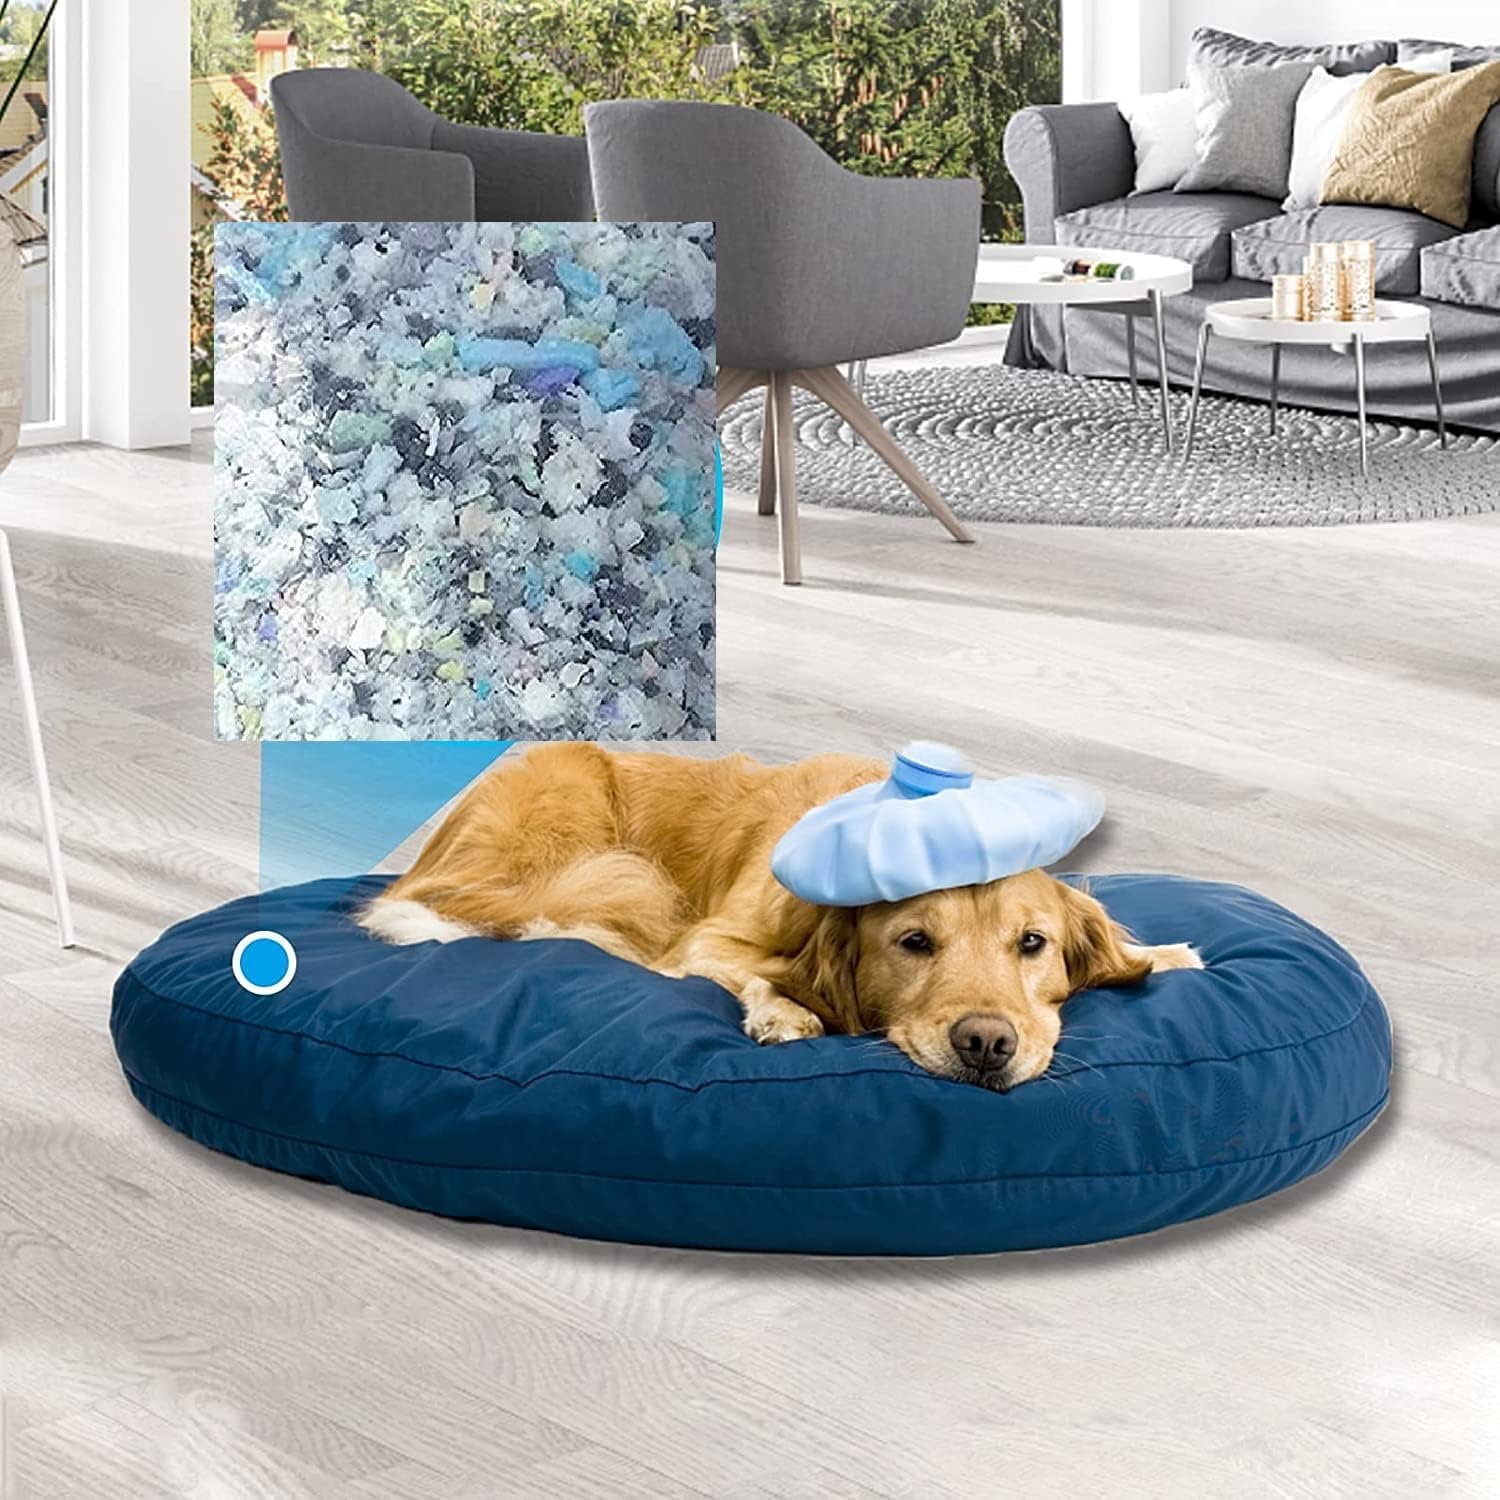 Amorstra Bean Bag Filler Shredded Memory Foam Filling 10 Pounds, Pillow  Stuffing Bean Bag Refill Material for Pouf Ottoman Couch Cushion Dog Bed  Stuffed Animals and Art Crafts - Blue 